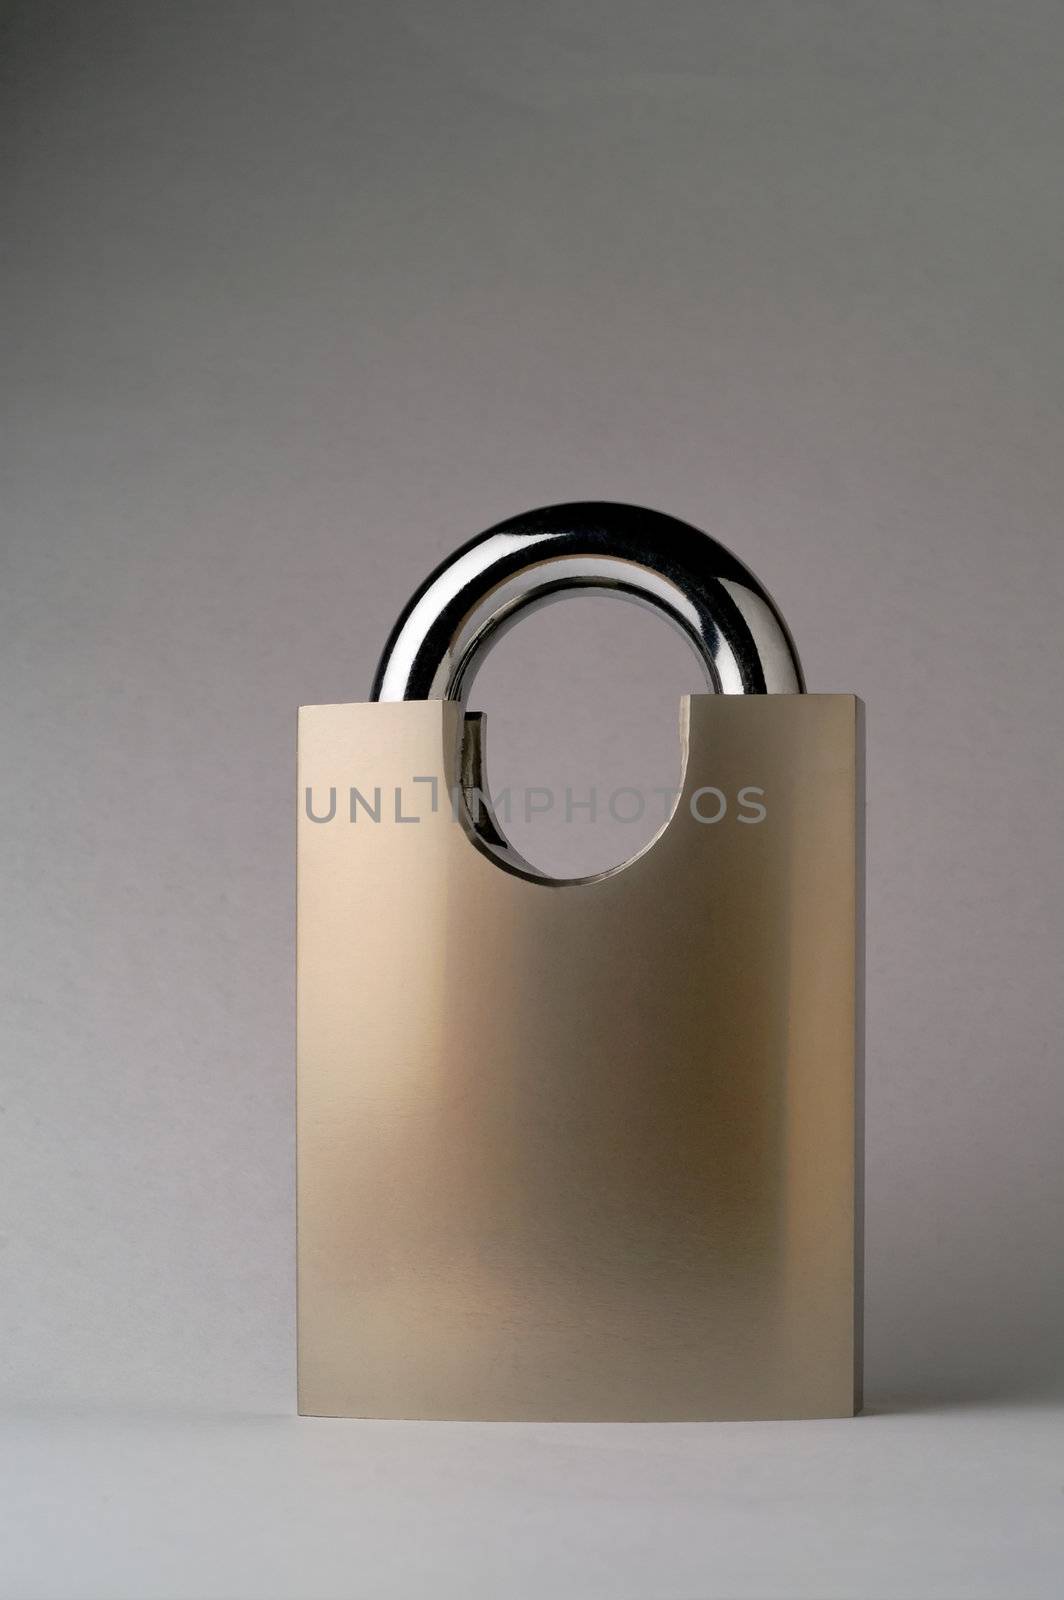 High security padlock by Laborer